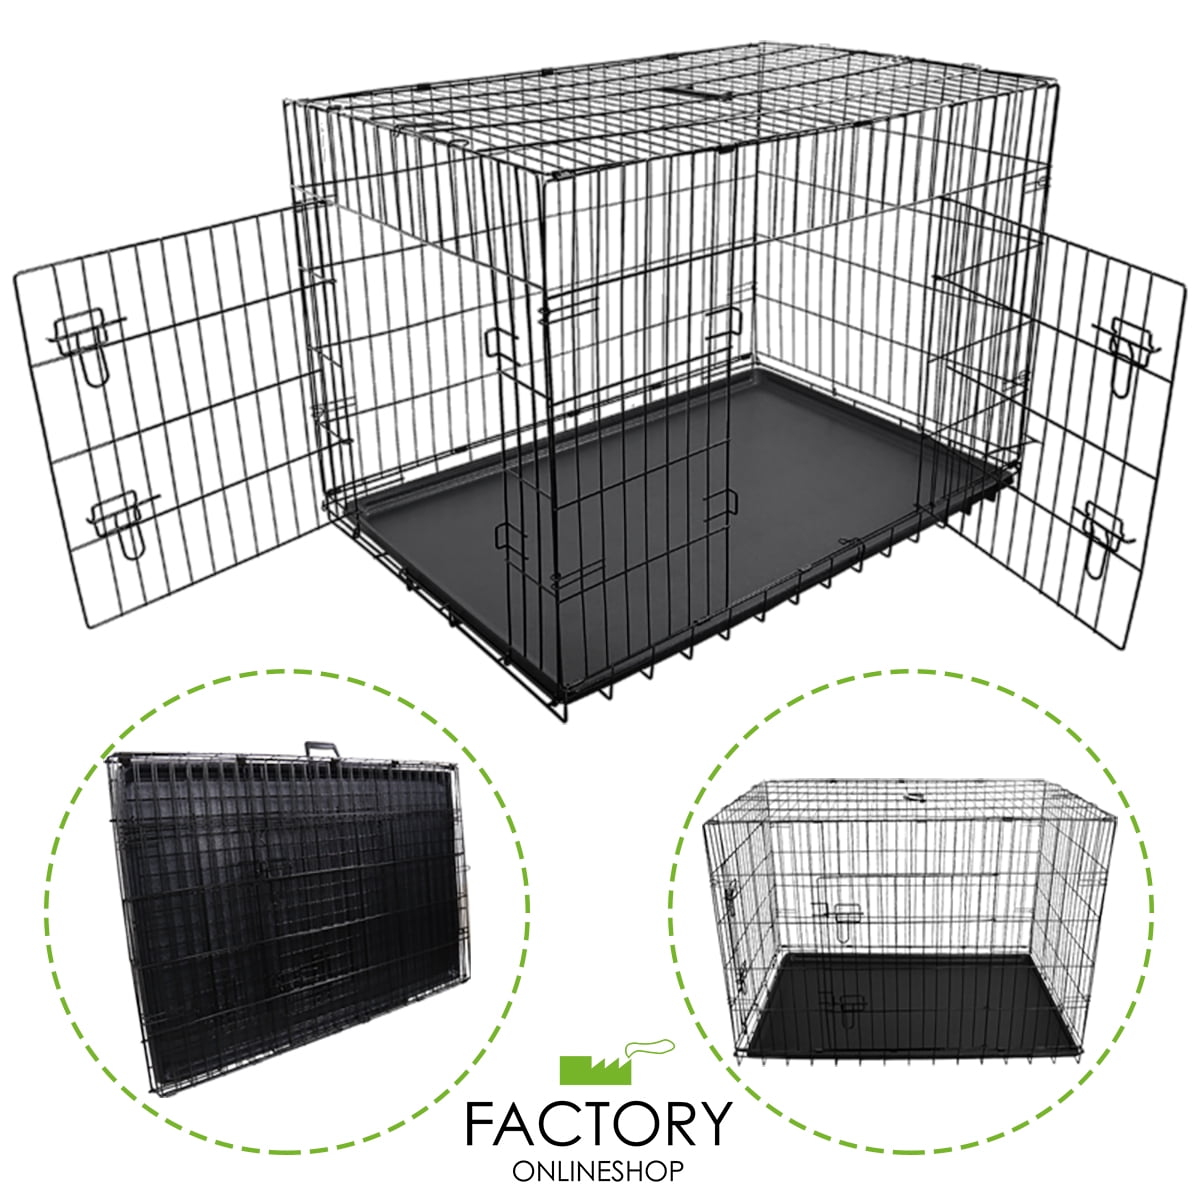 36" Pet Animal Kennel Pen Cat Dog Crate Travel Carrier Folding Cage House 2 Door 